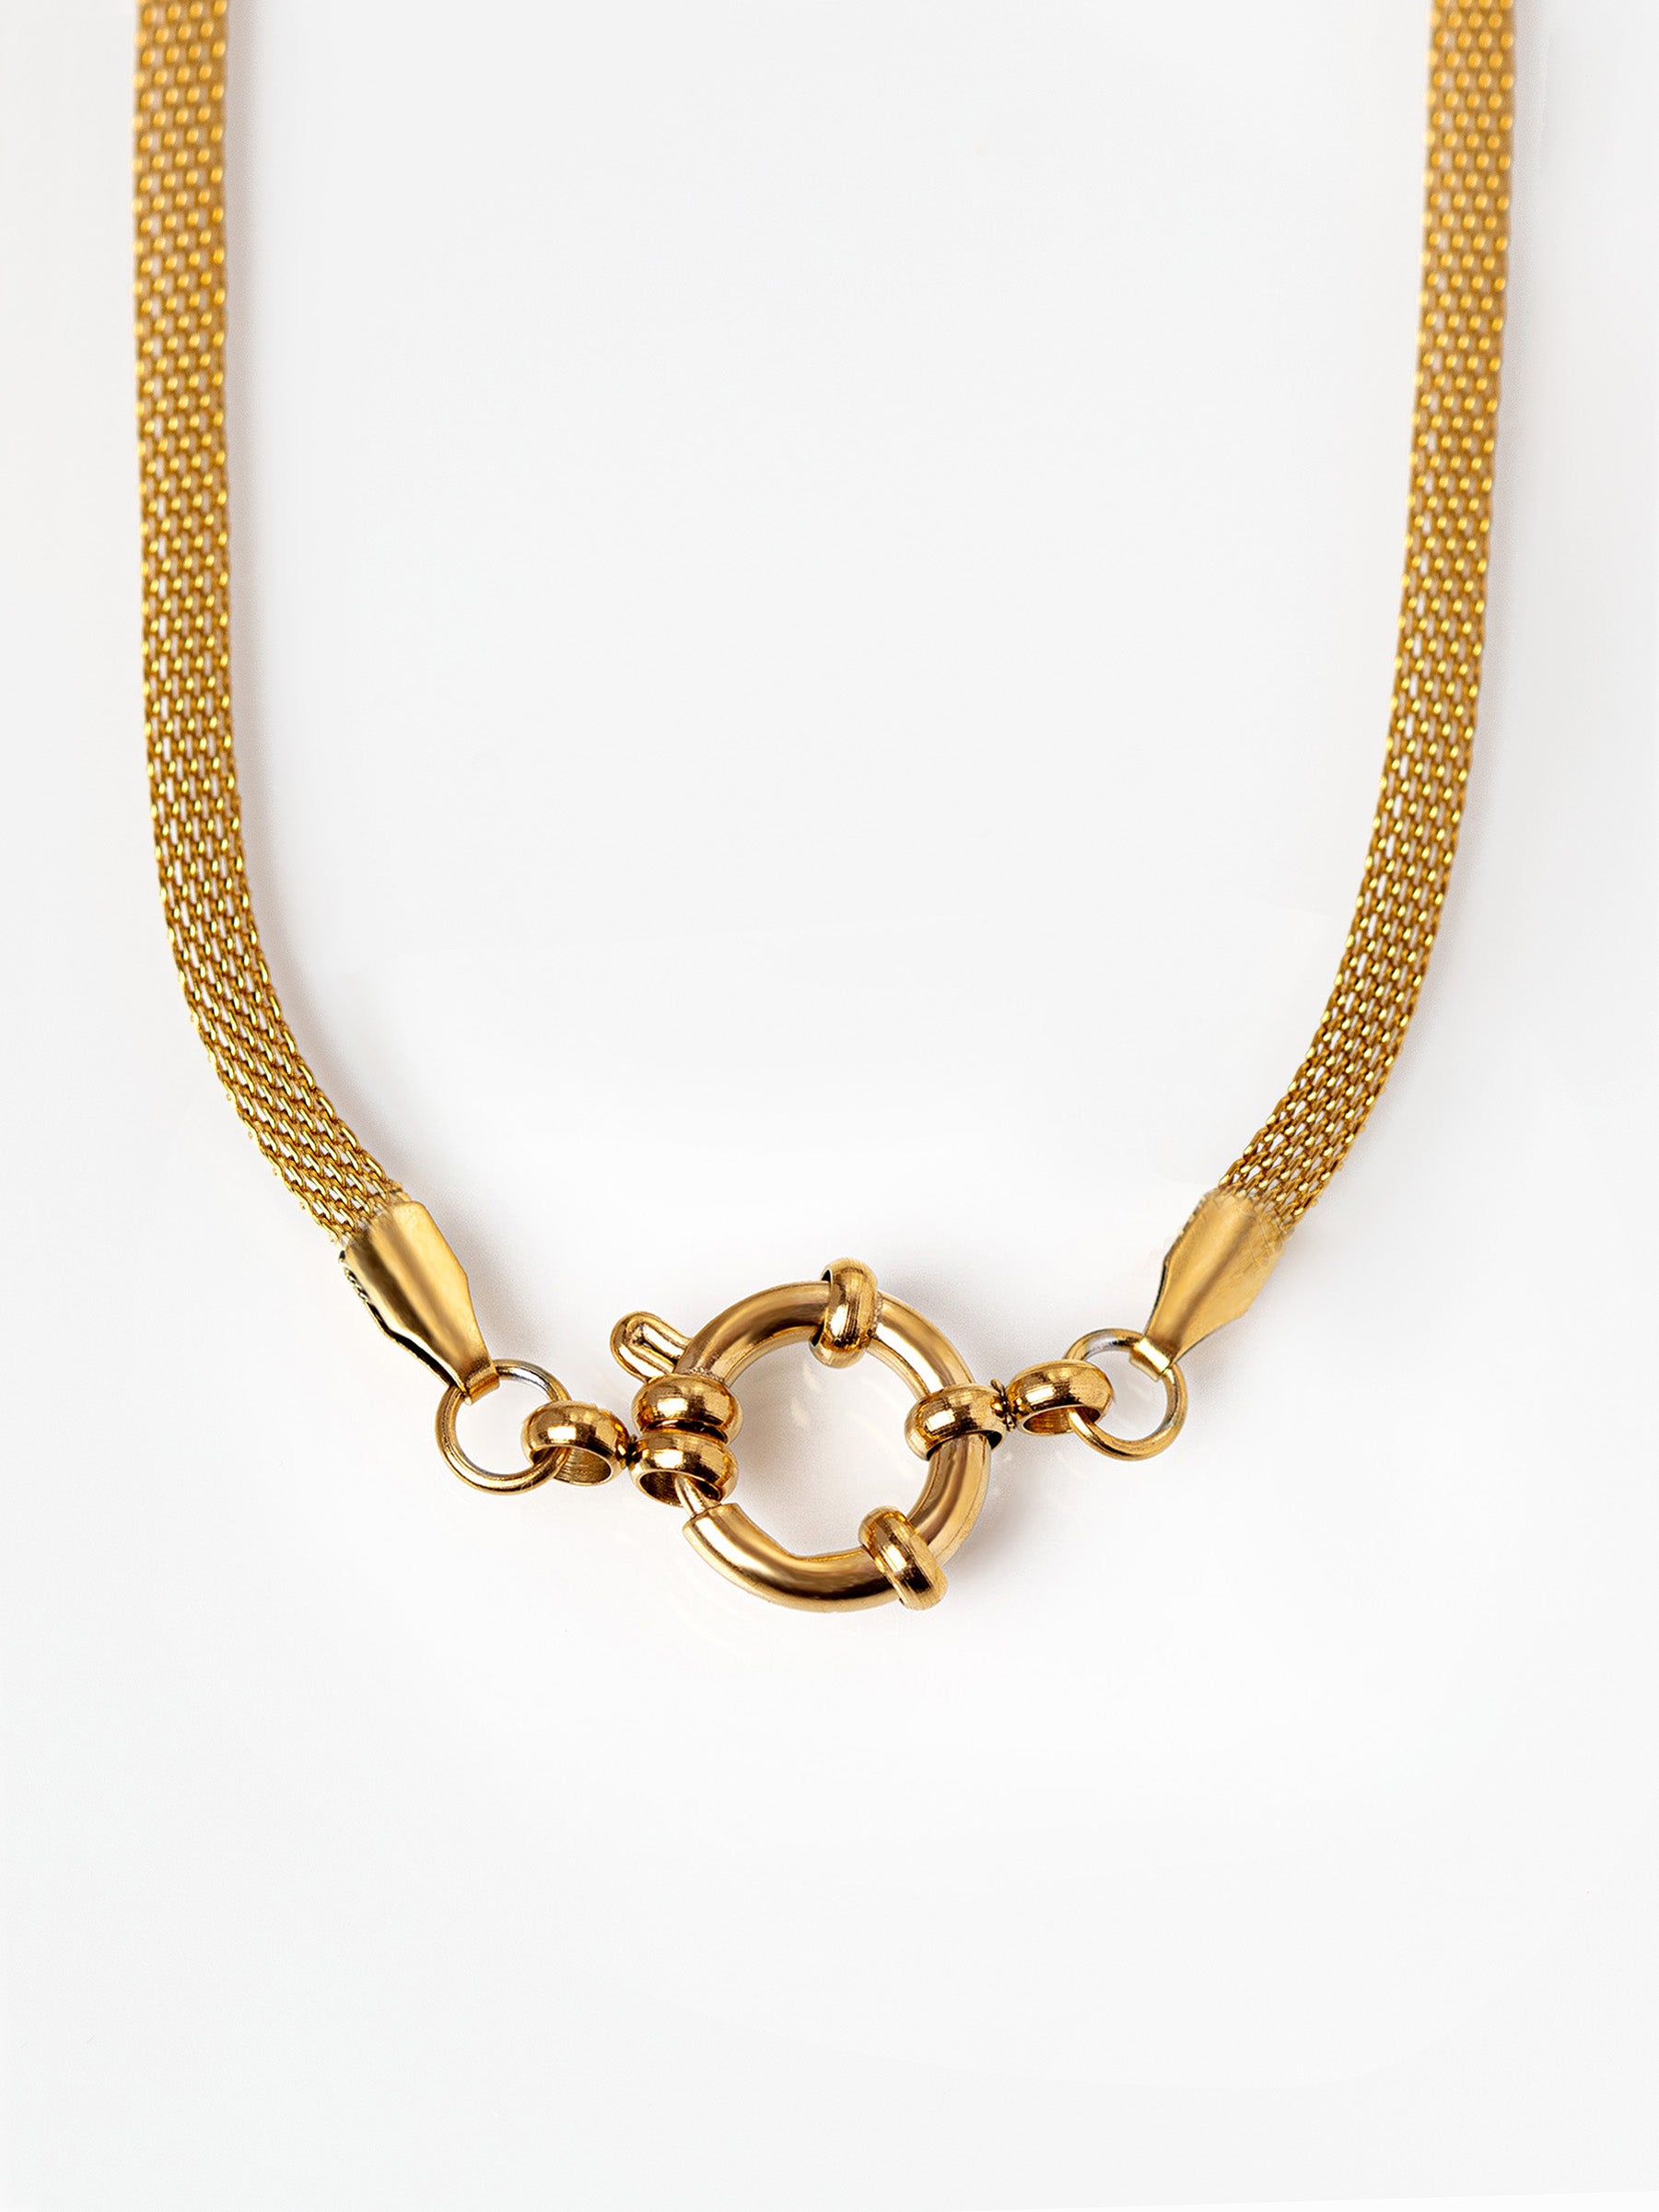 Gold Braided Bishmark Chain For Charms - 45cm